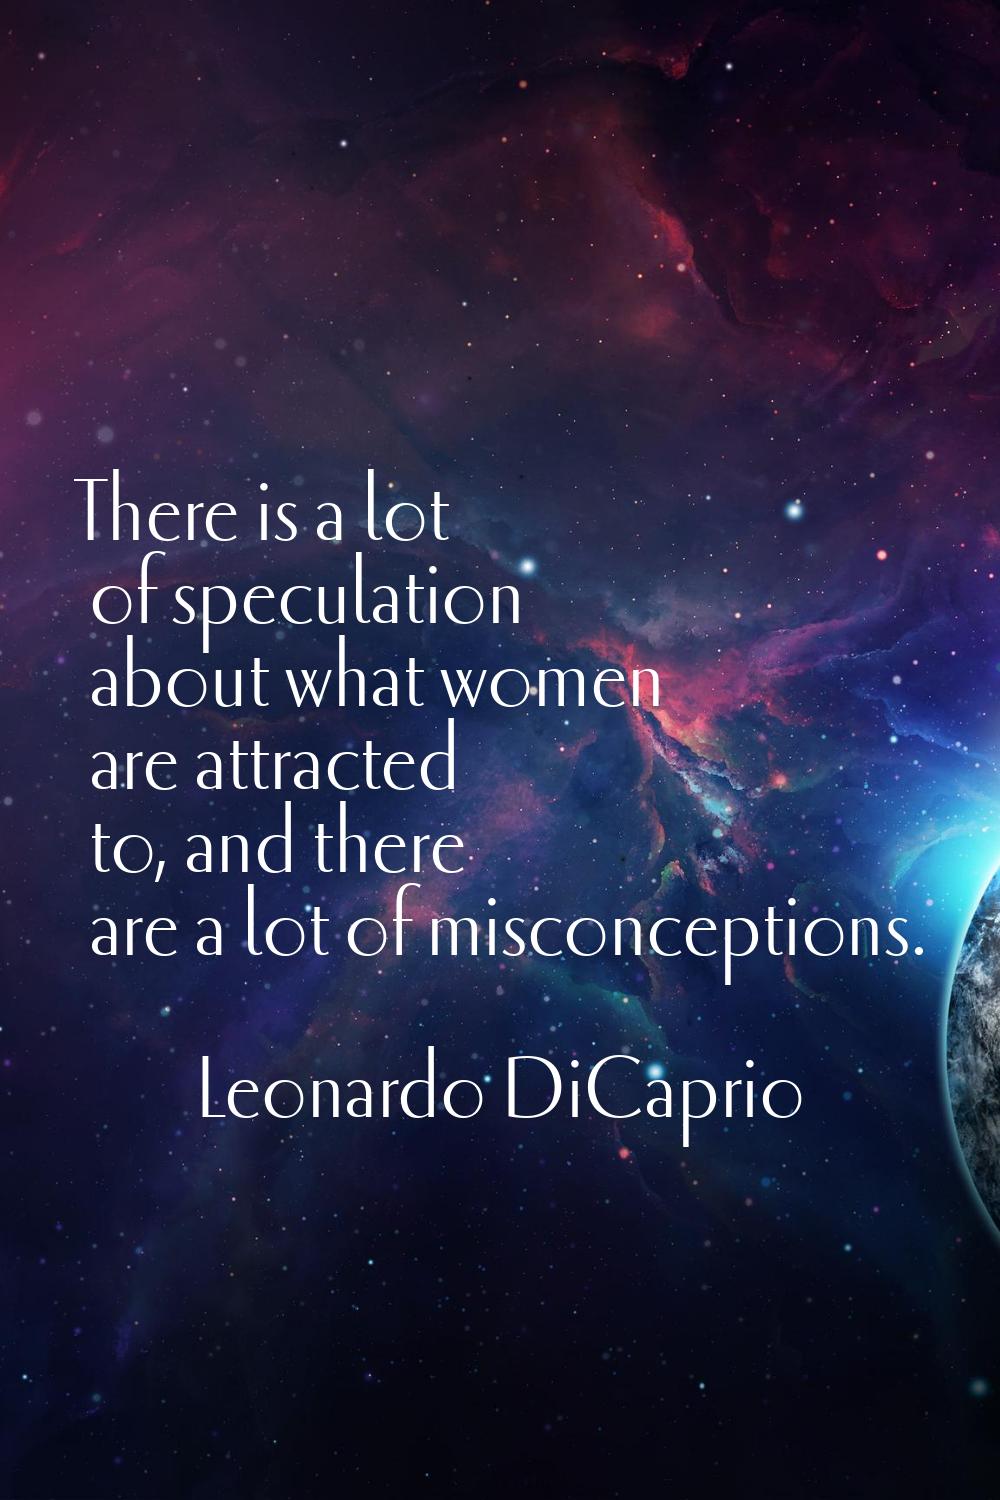 There is a lot of speculation about what women are attracted to, and there are a lot of misconcepti